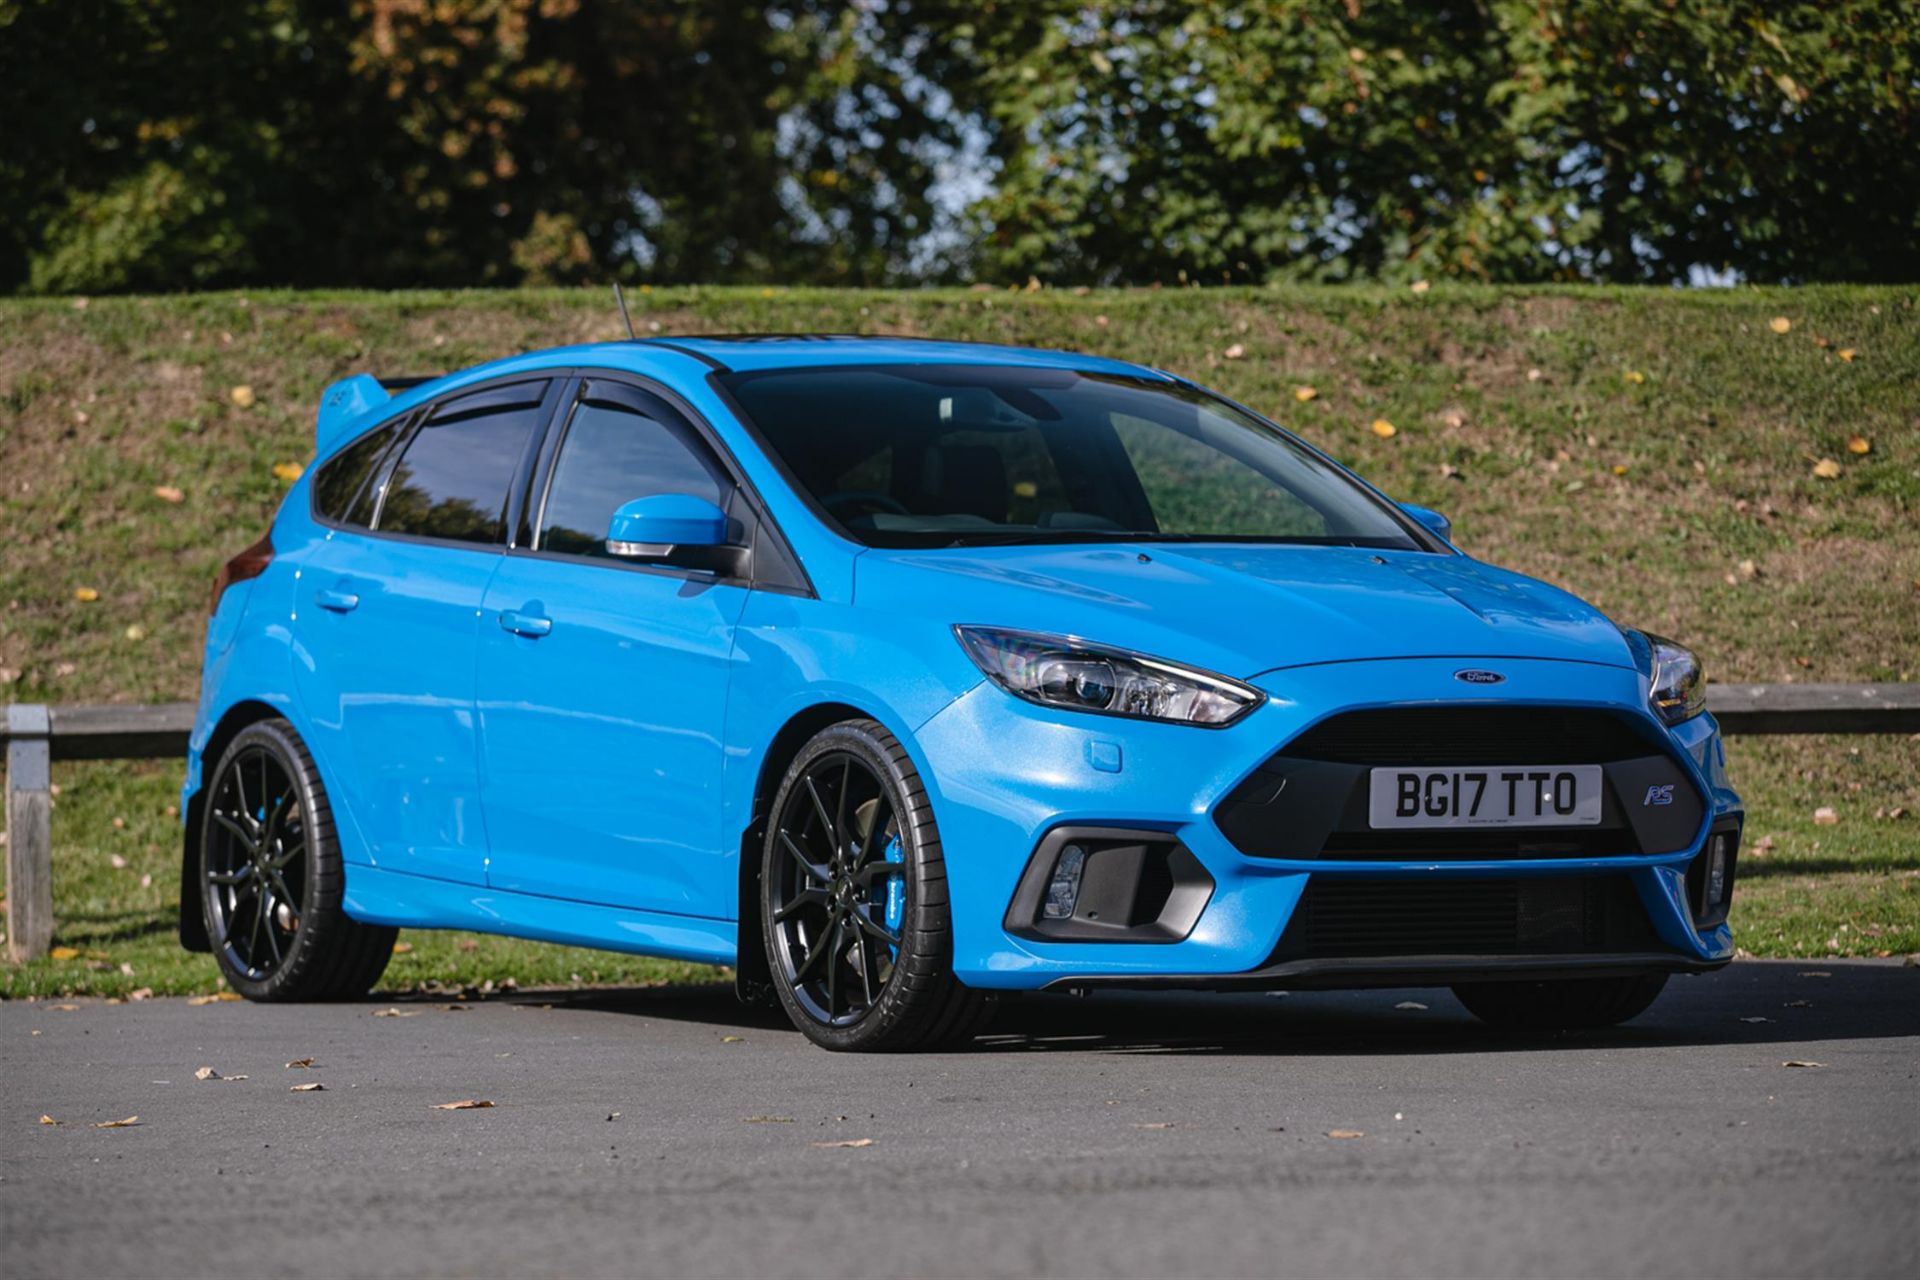 2017 Ford Focus RS Mk3 - 901 miles